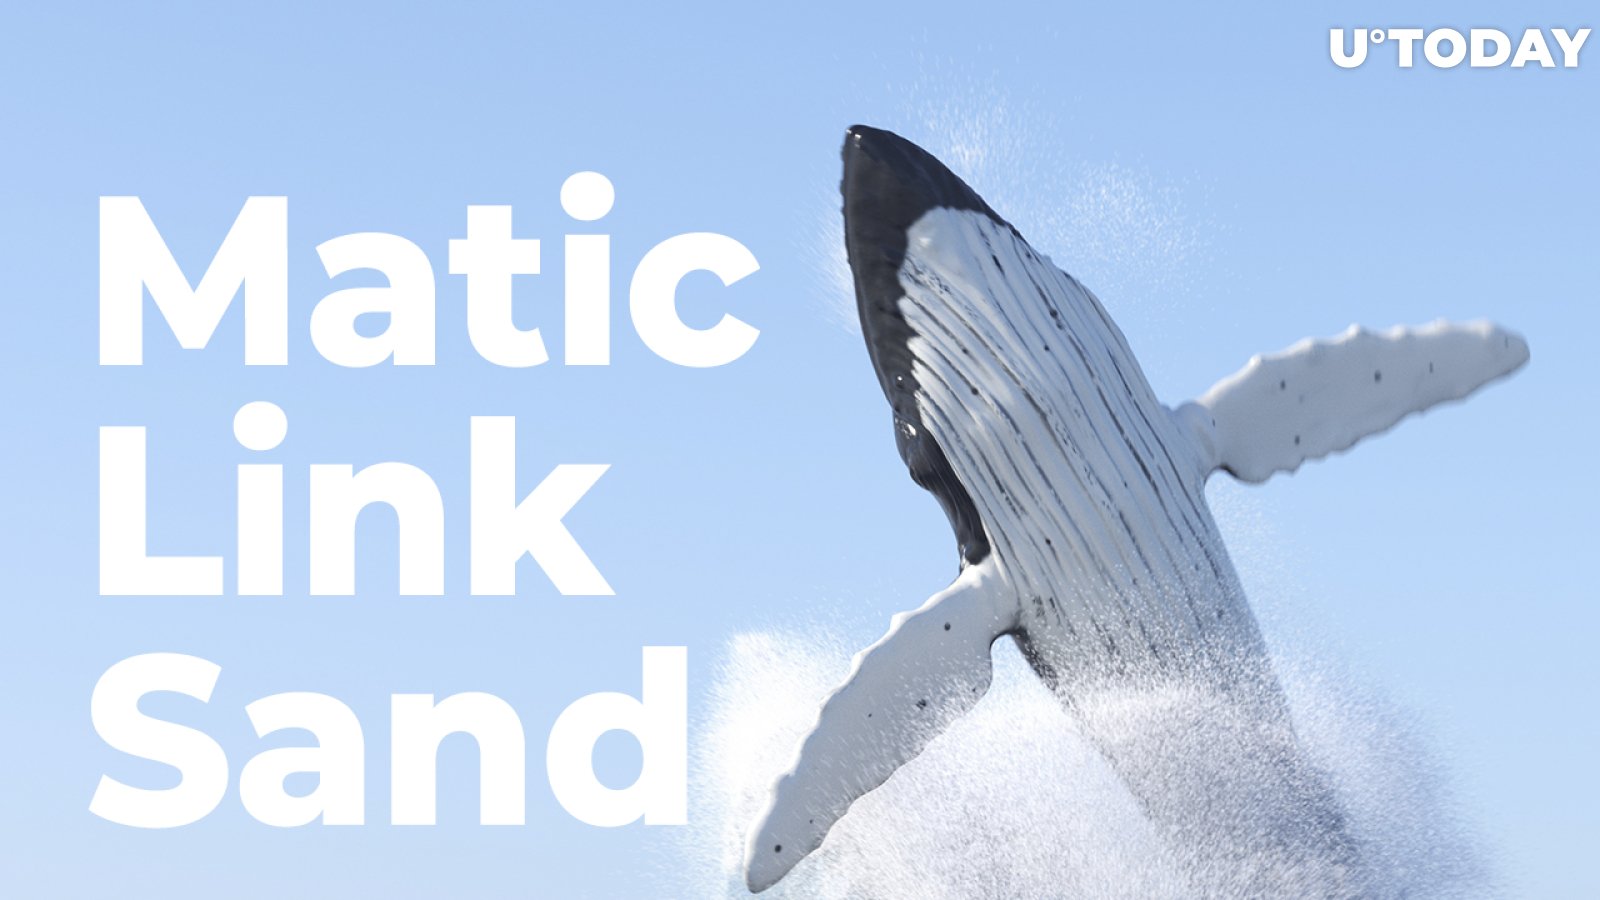 Matic, Link, Sand: Crypto Whales Are on Buying Spree, WhaleStats Report